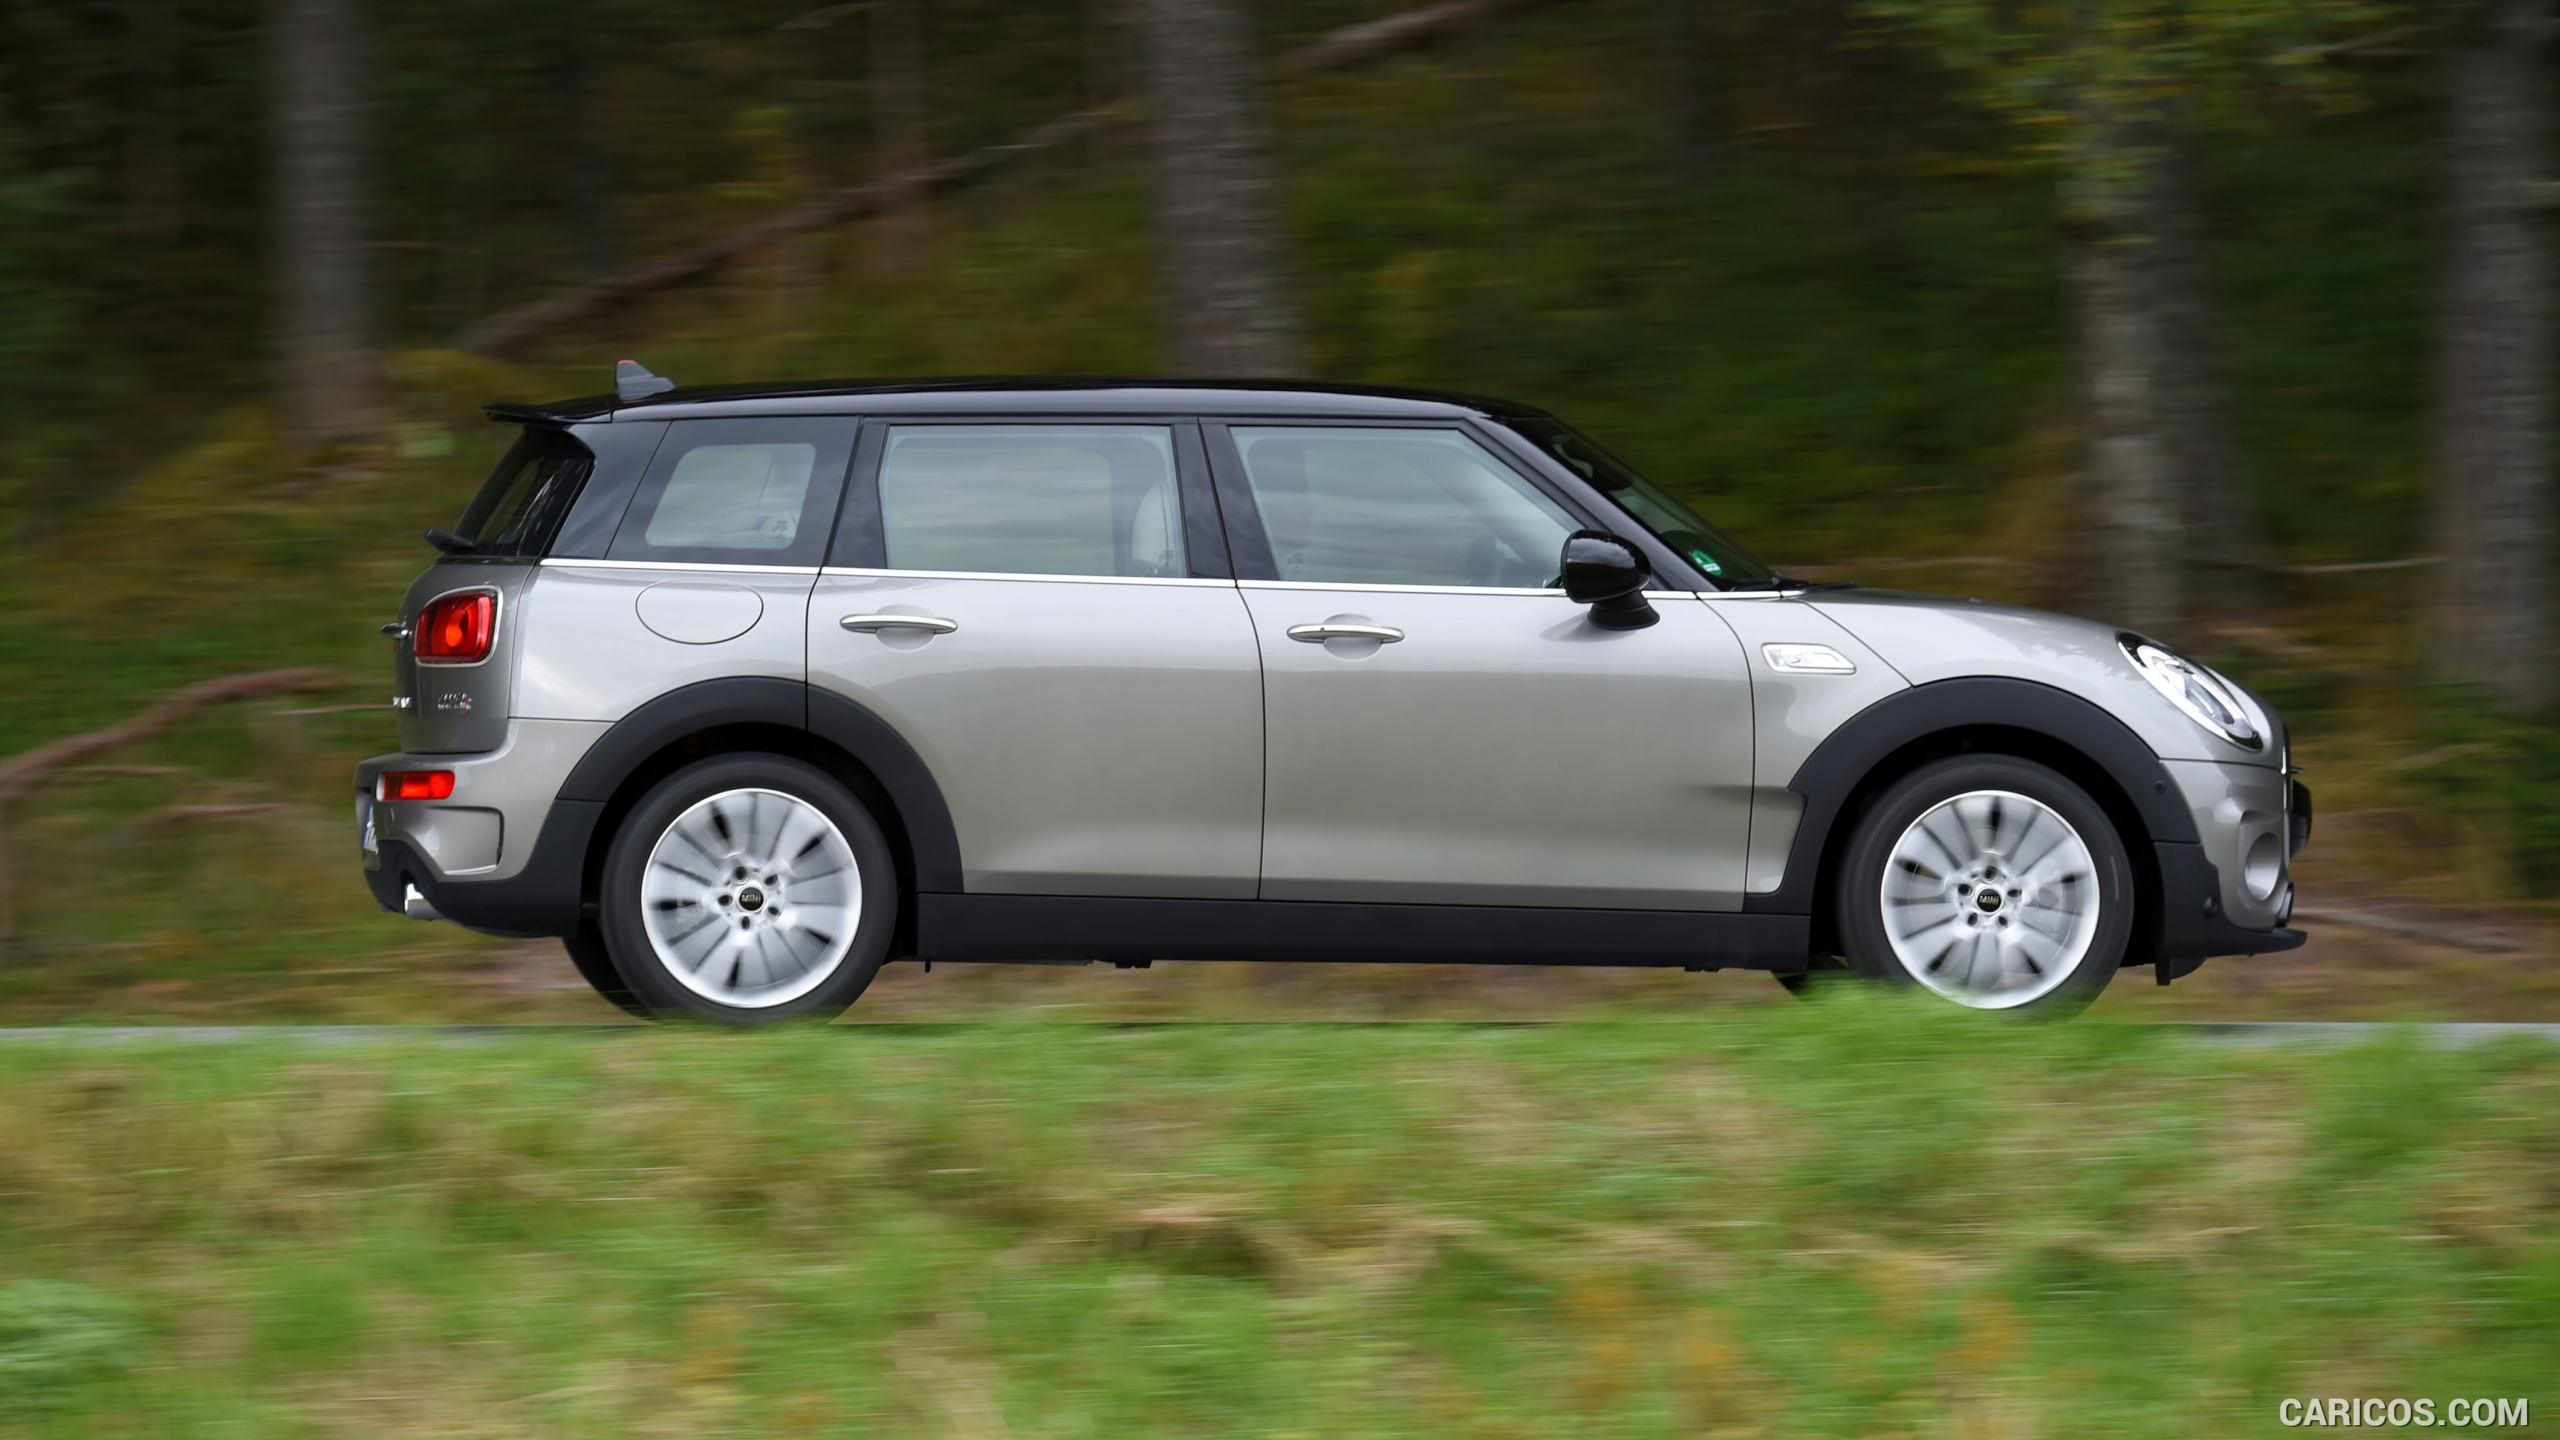 2016 MINI Cooper S Clubman in Metallic Melting Silver - Side, #159 of 380